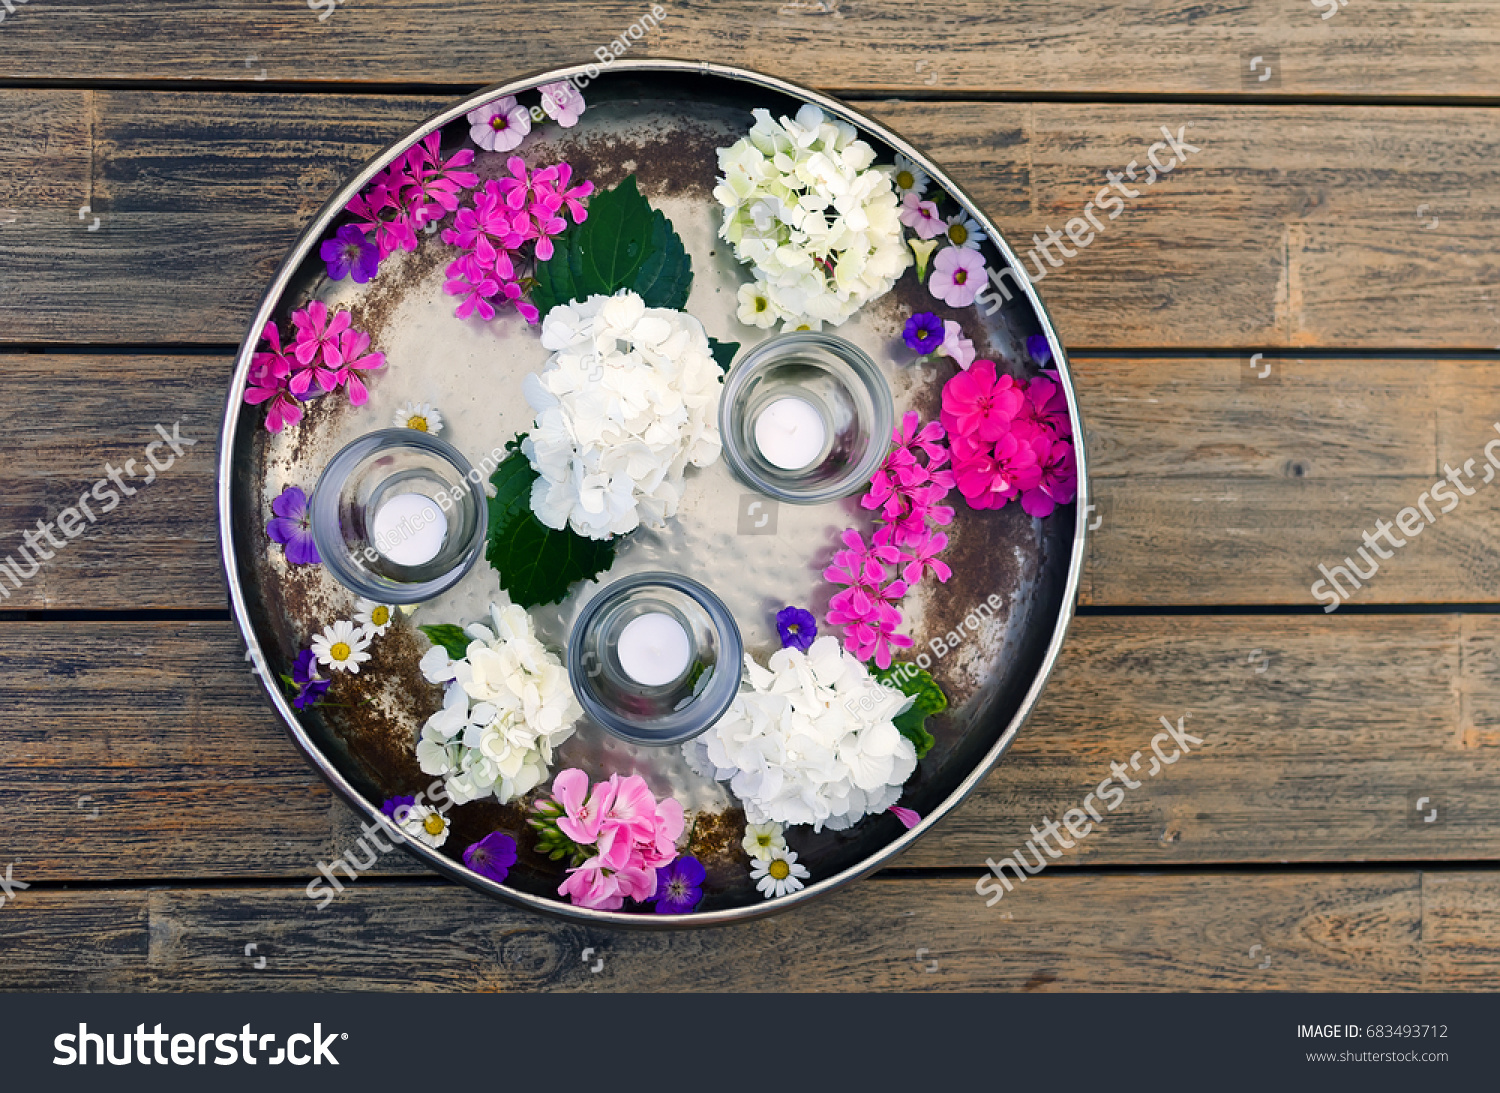 stock-photo-spa-set-on-rustic-wooden-tab